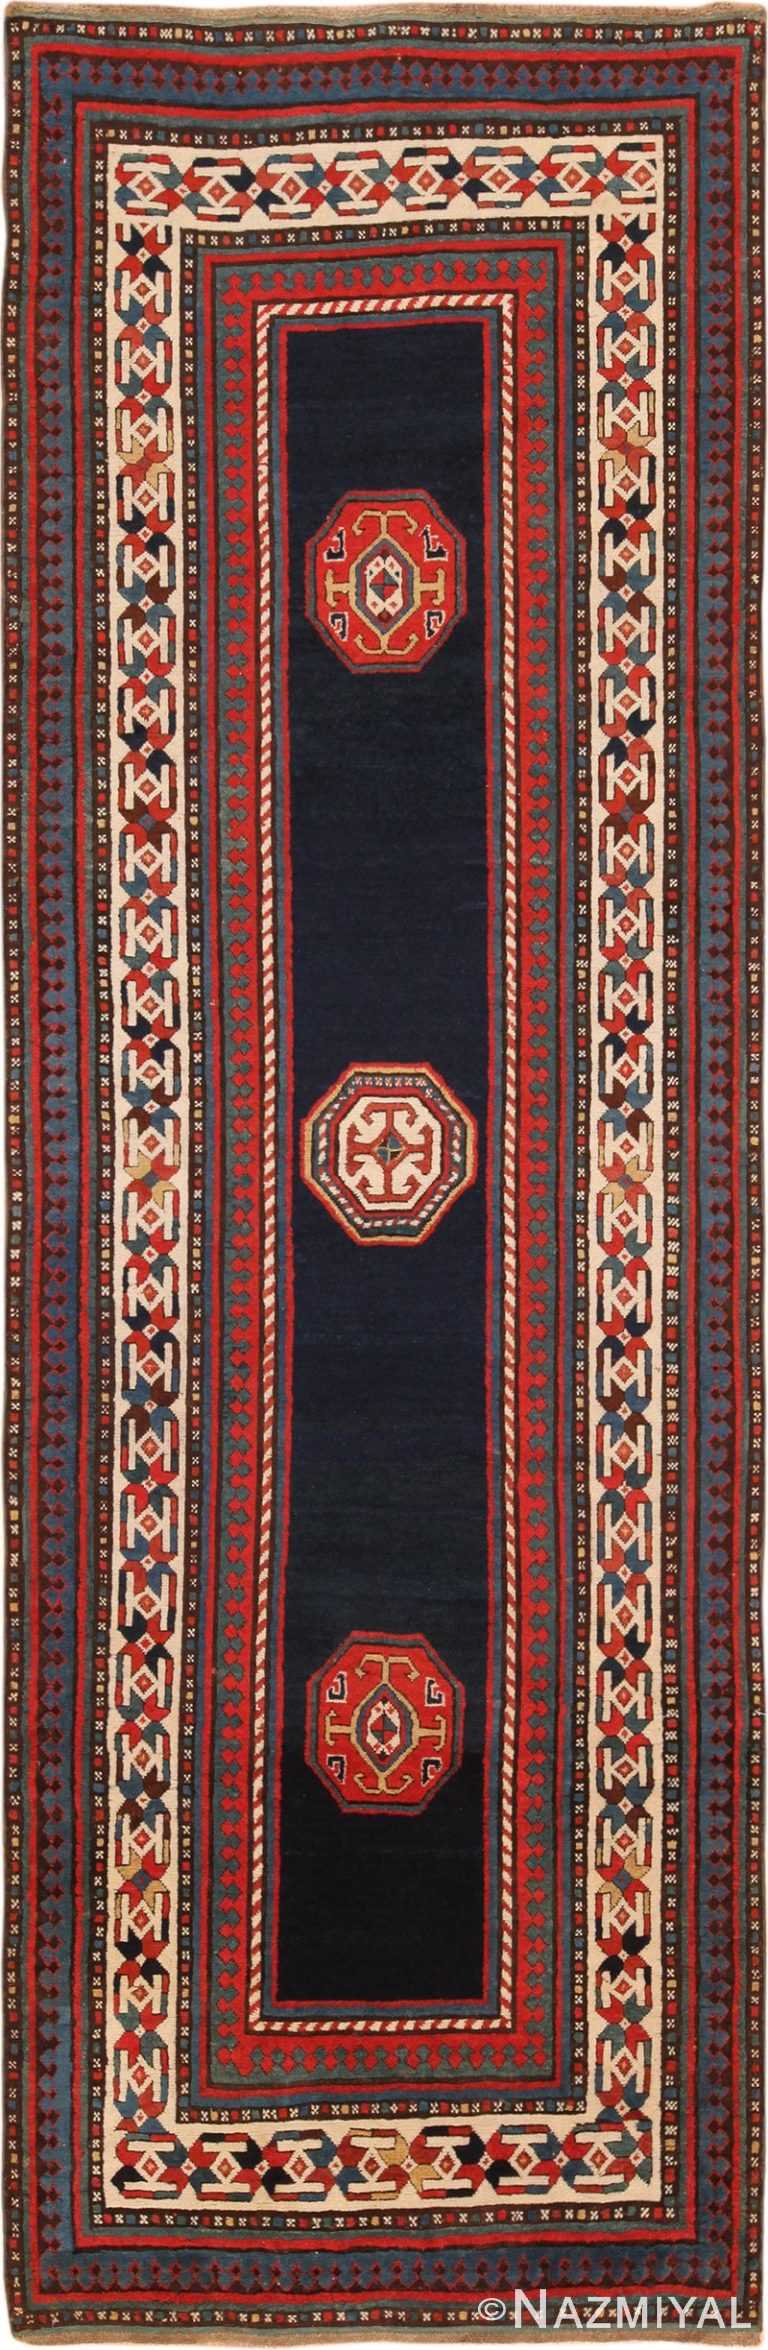 Full view Antique Talish Caucasian runner rug #70127 by Nazmiyal Antique Rugs